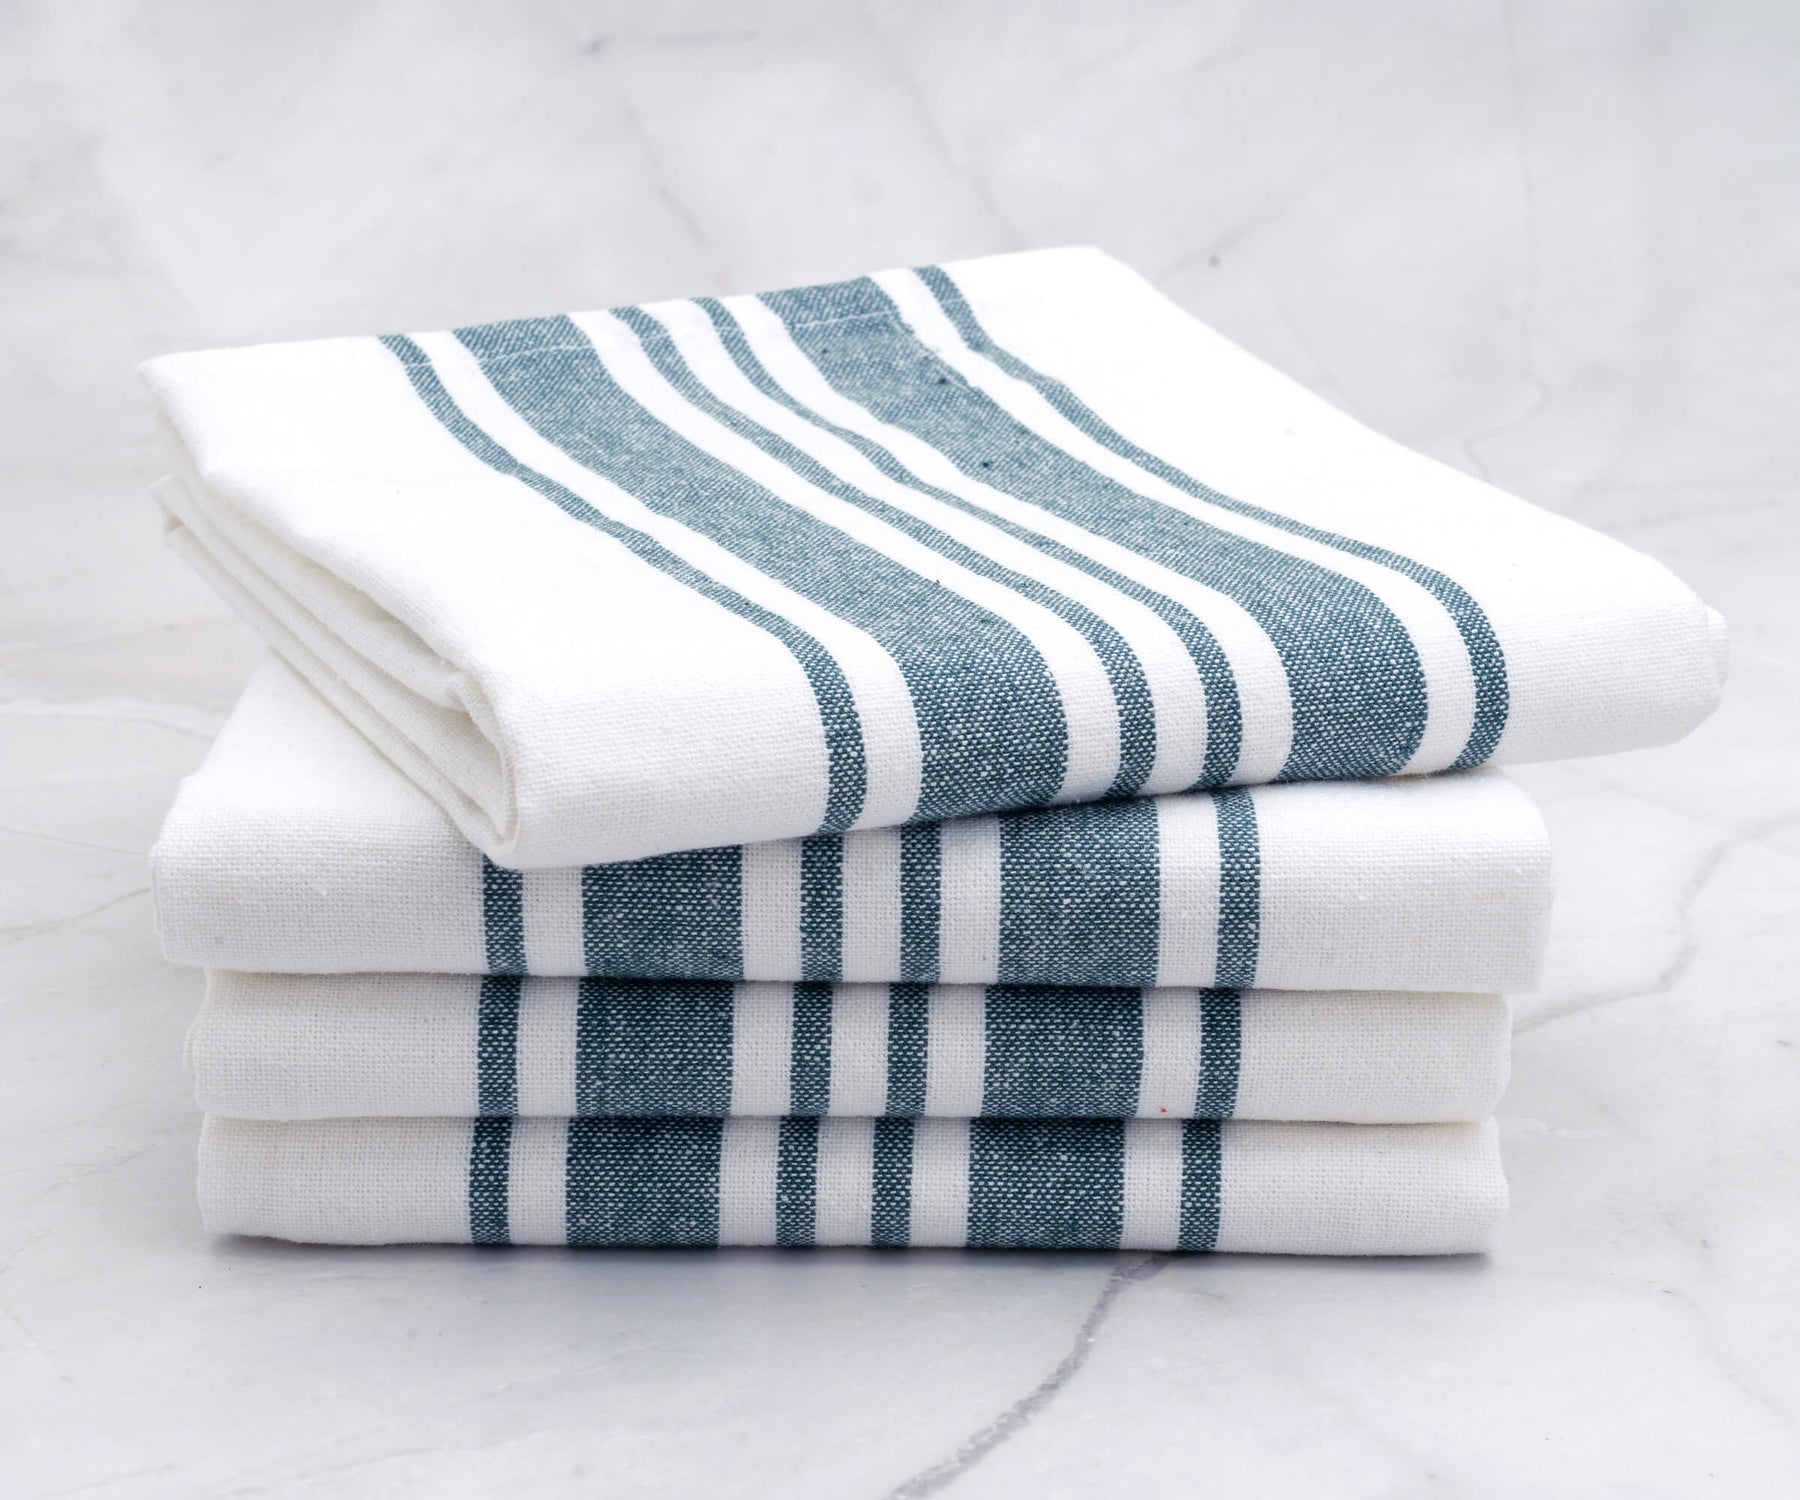 An arrangement of blue and white striped kitchen towels neatly stacked